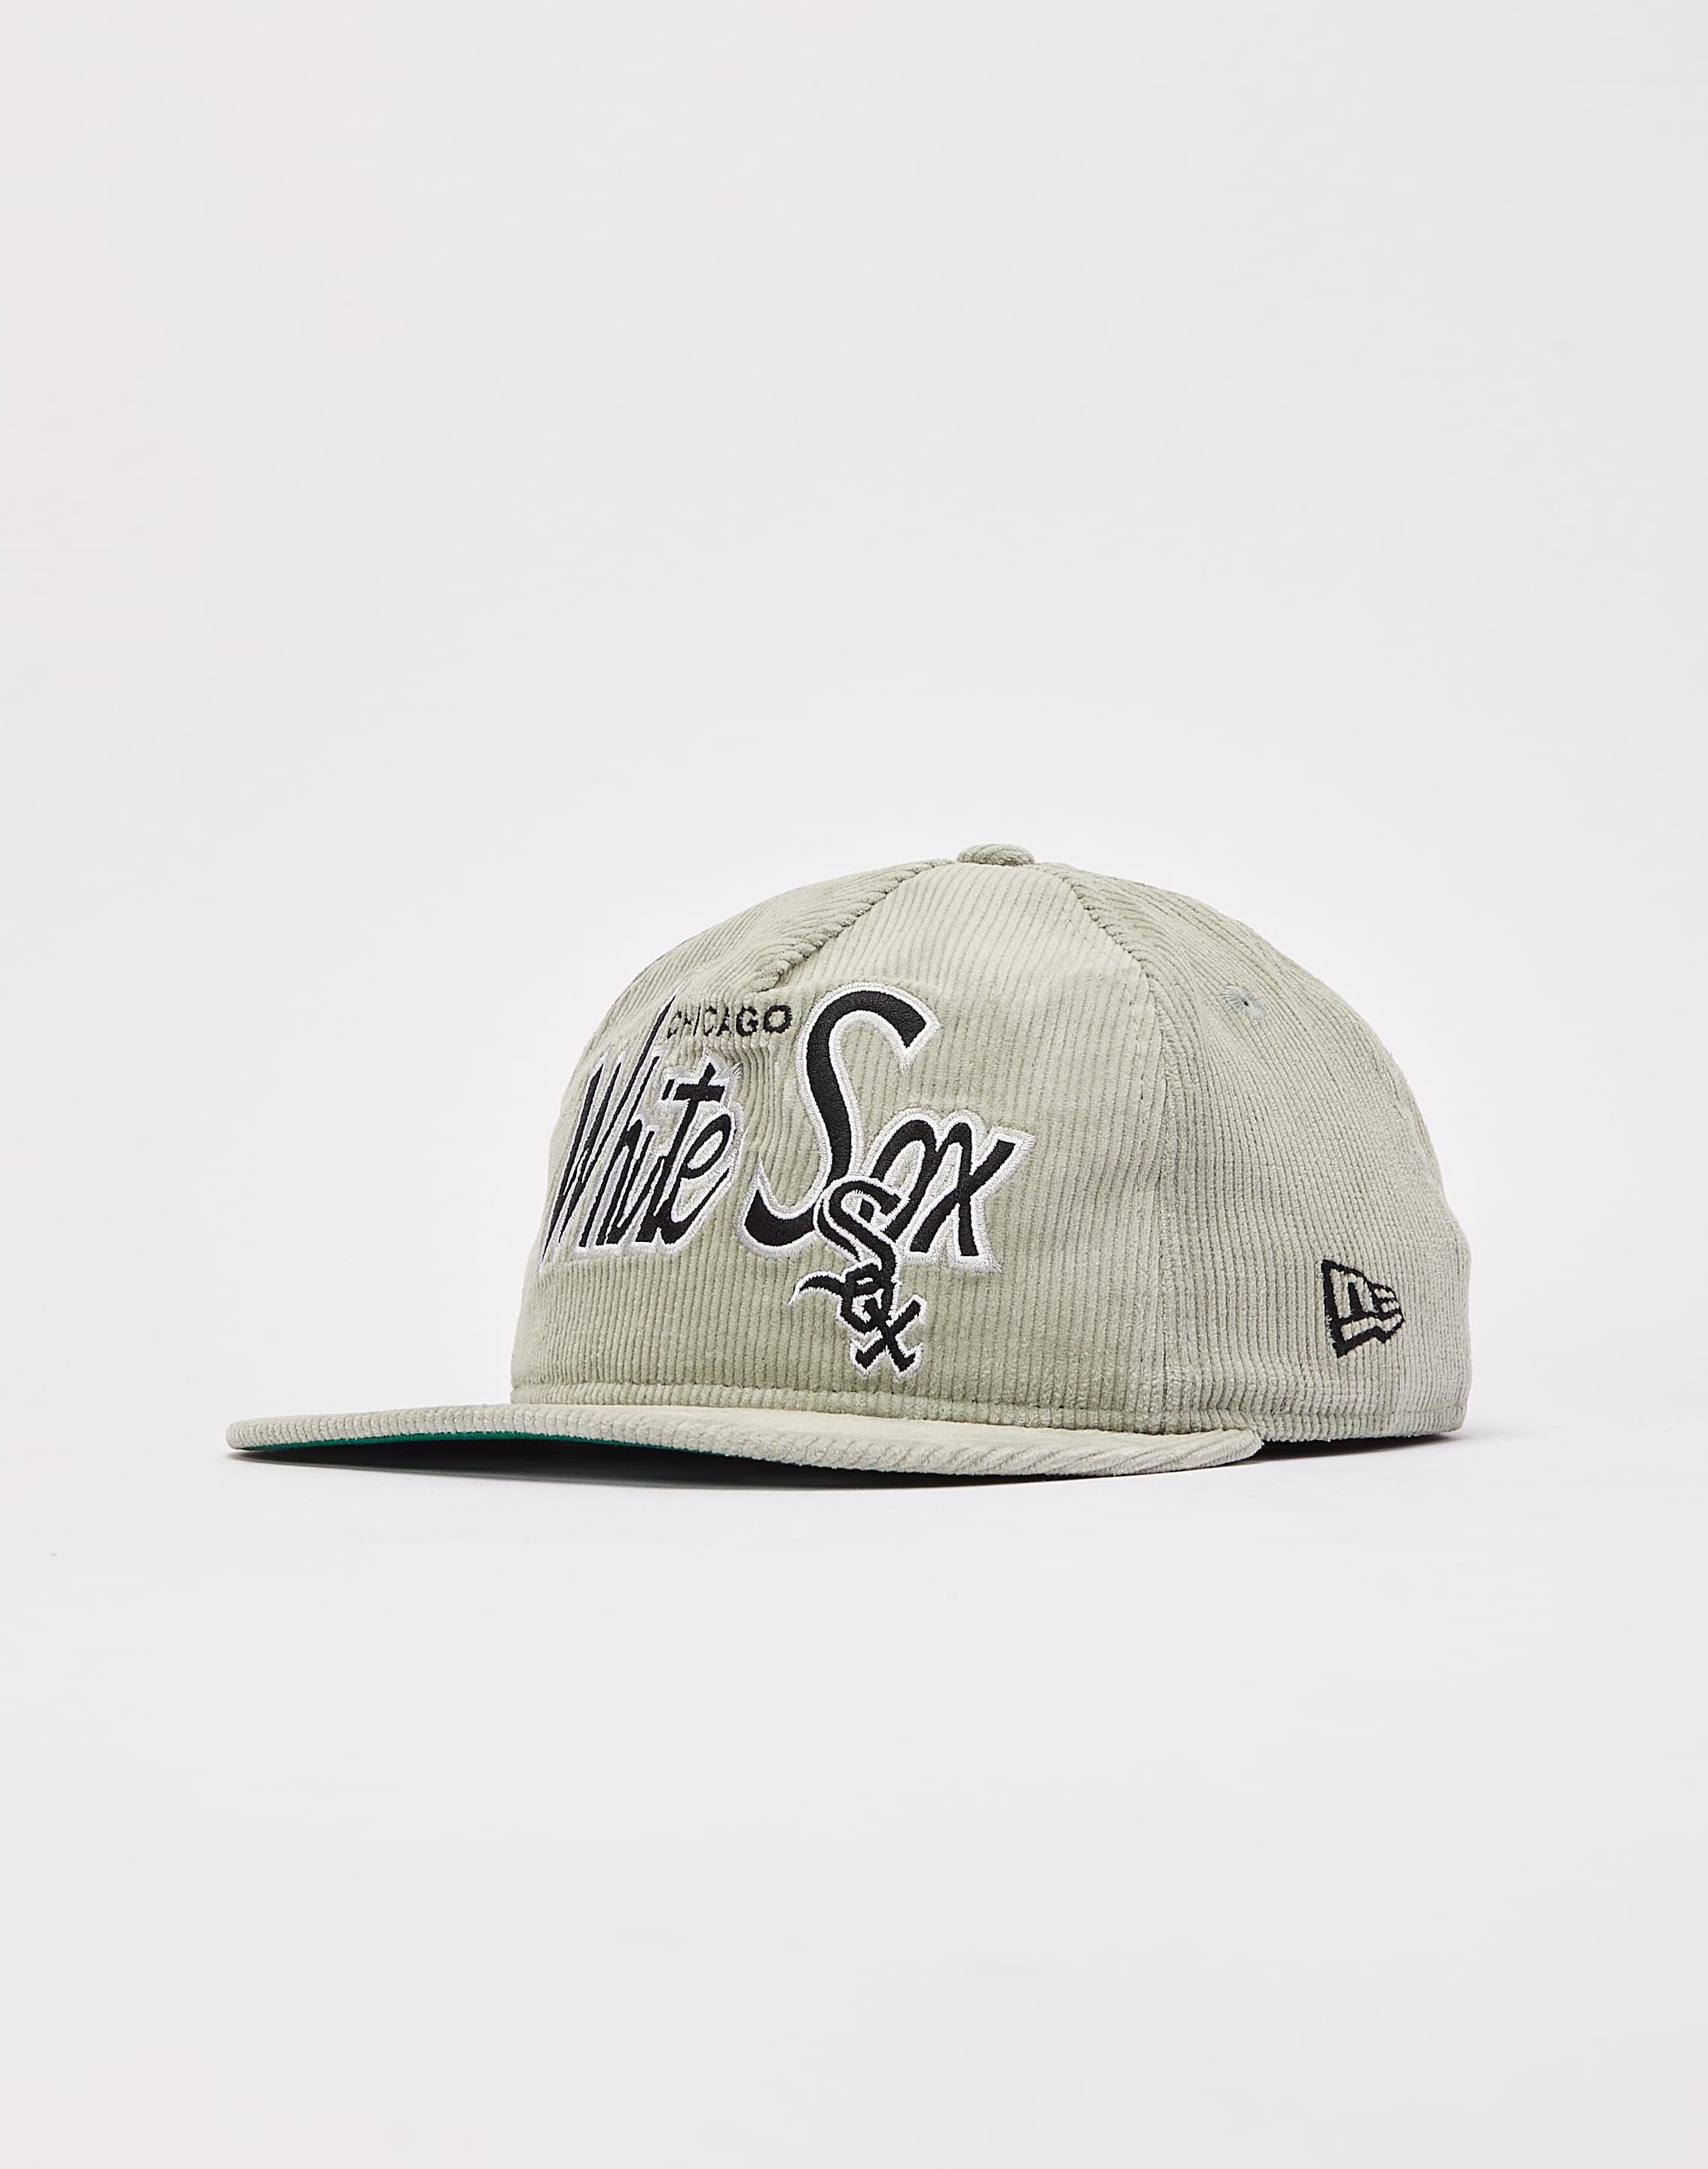 Chicago White Sox Hats, White Sox Gear, Chicago White Sox Pro Shop, Apparel